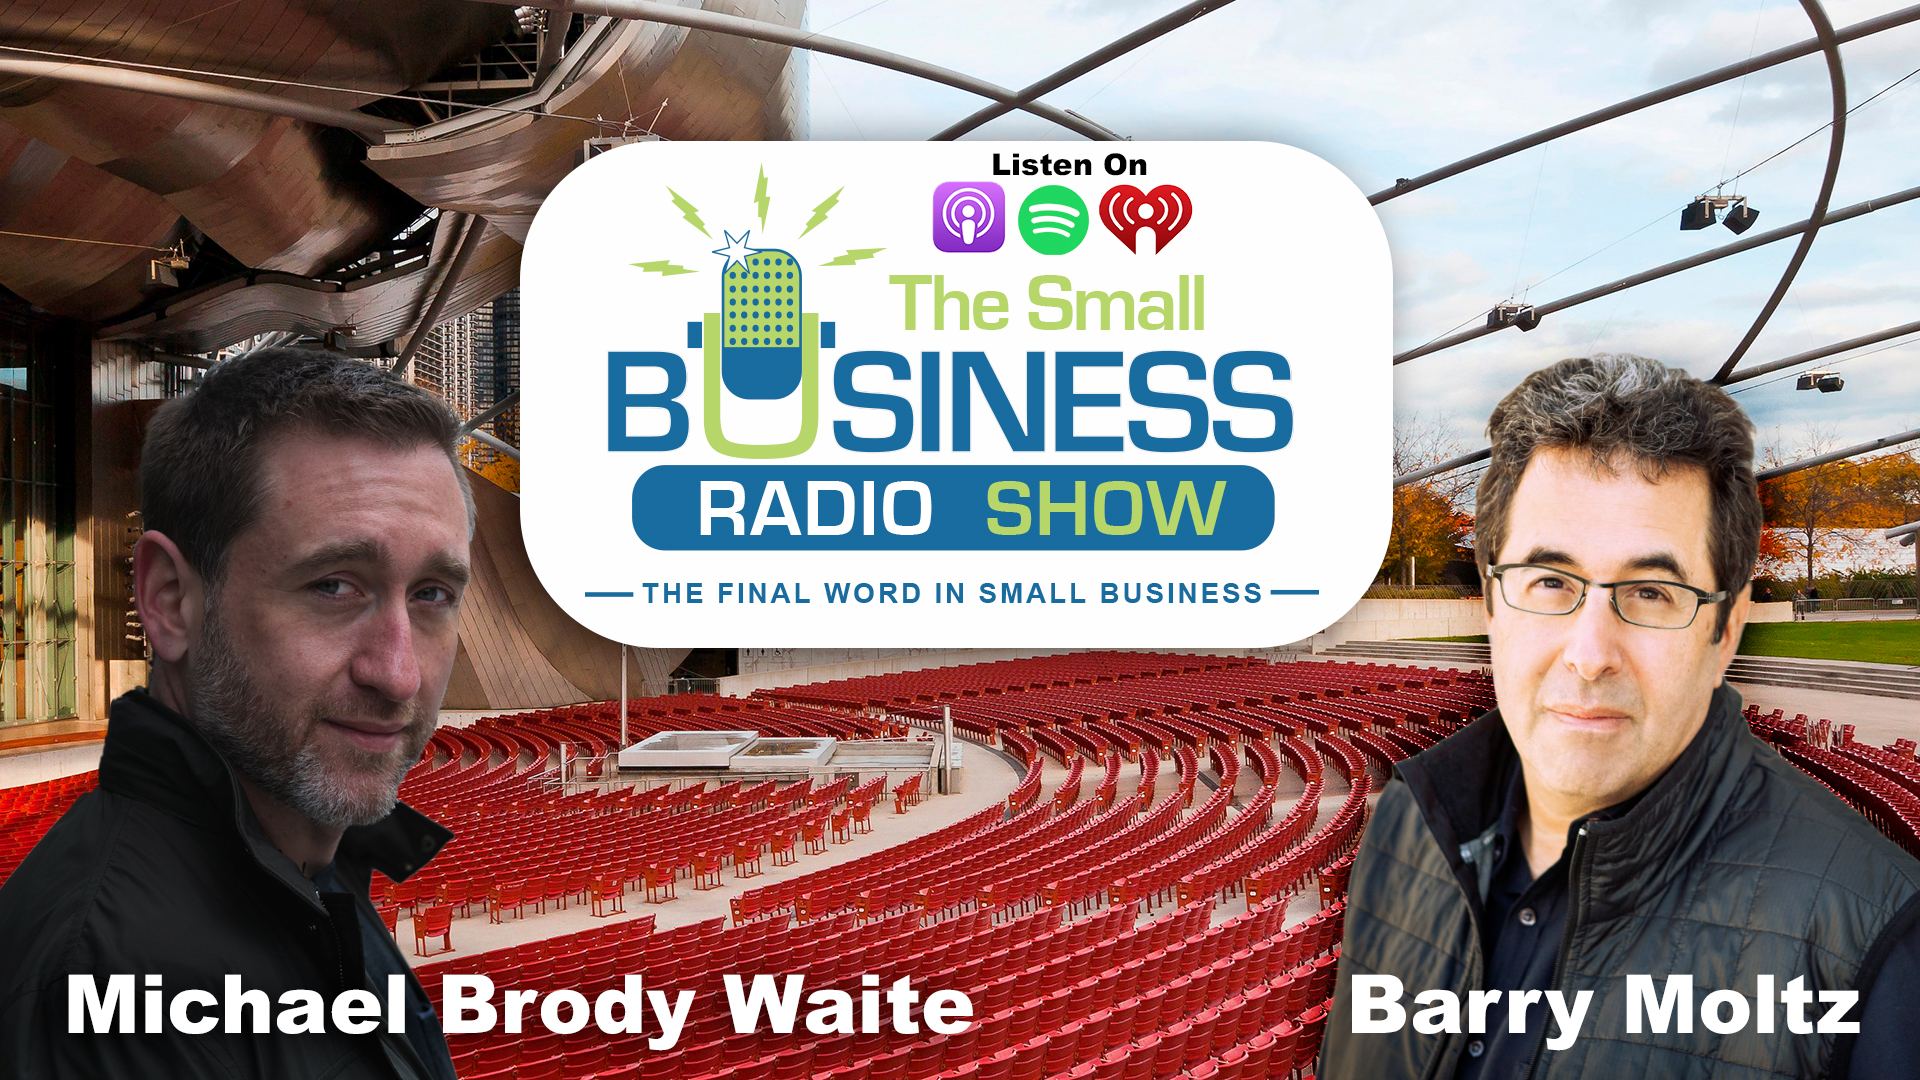 Michael Brody Waite on The Small Business Radio Show